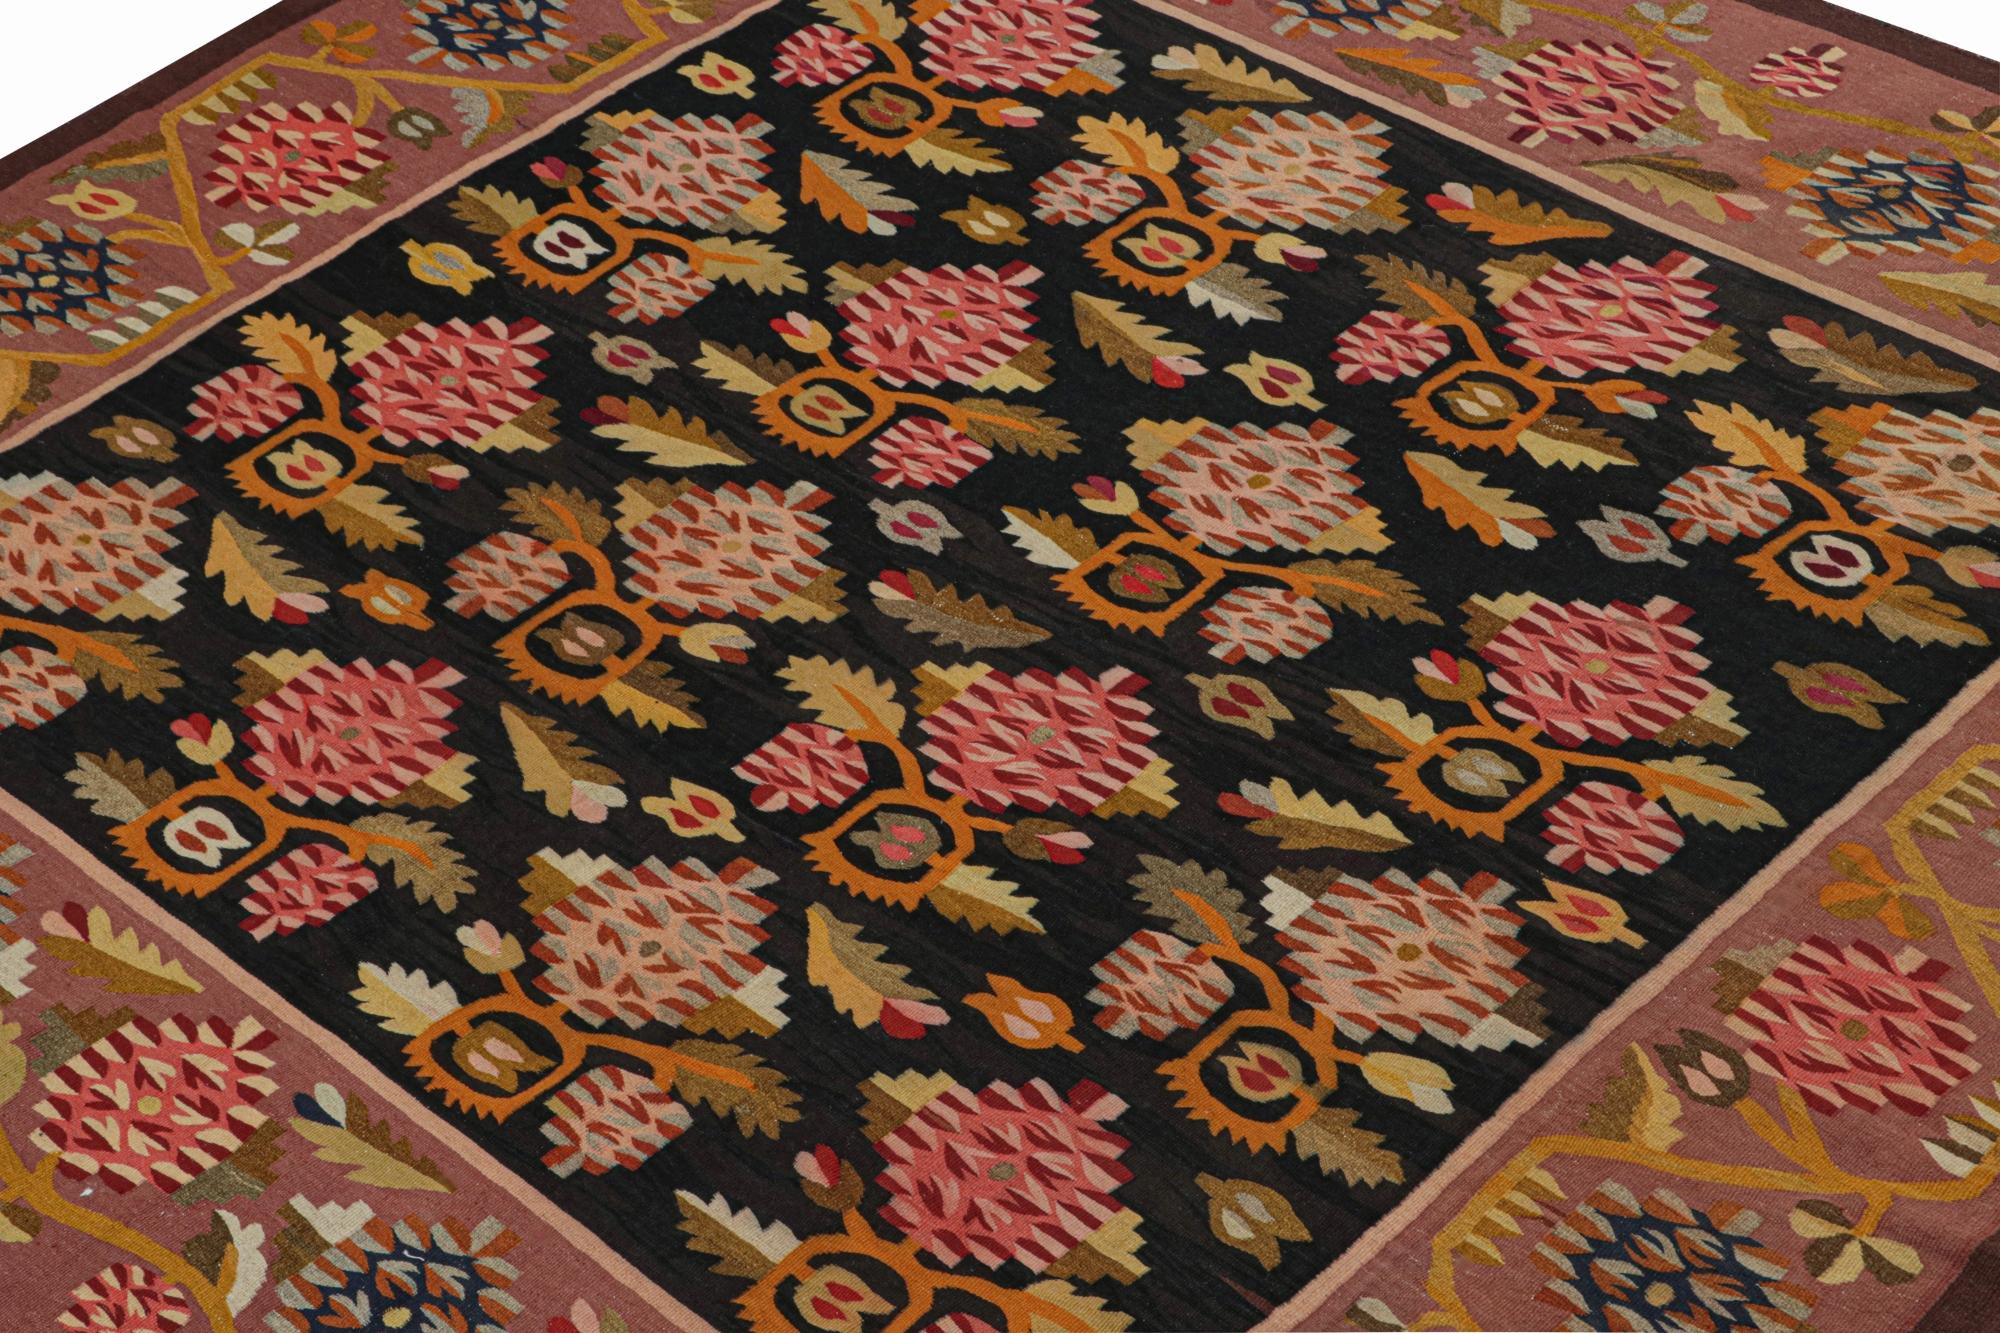 Hand-Knotted Antique Bessarabian Kilim in Black & Pink with Floral Patterns, from Rug & Kilim For Sale